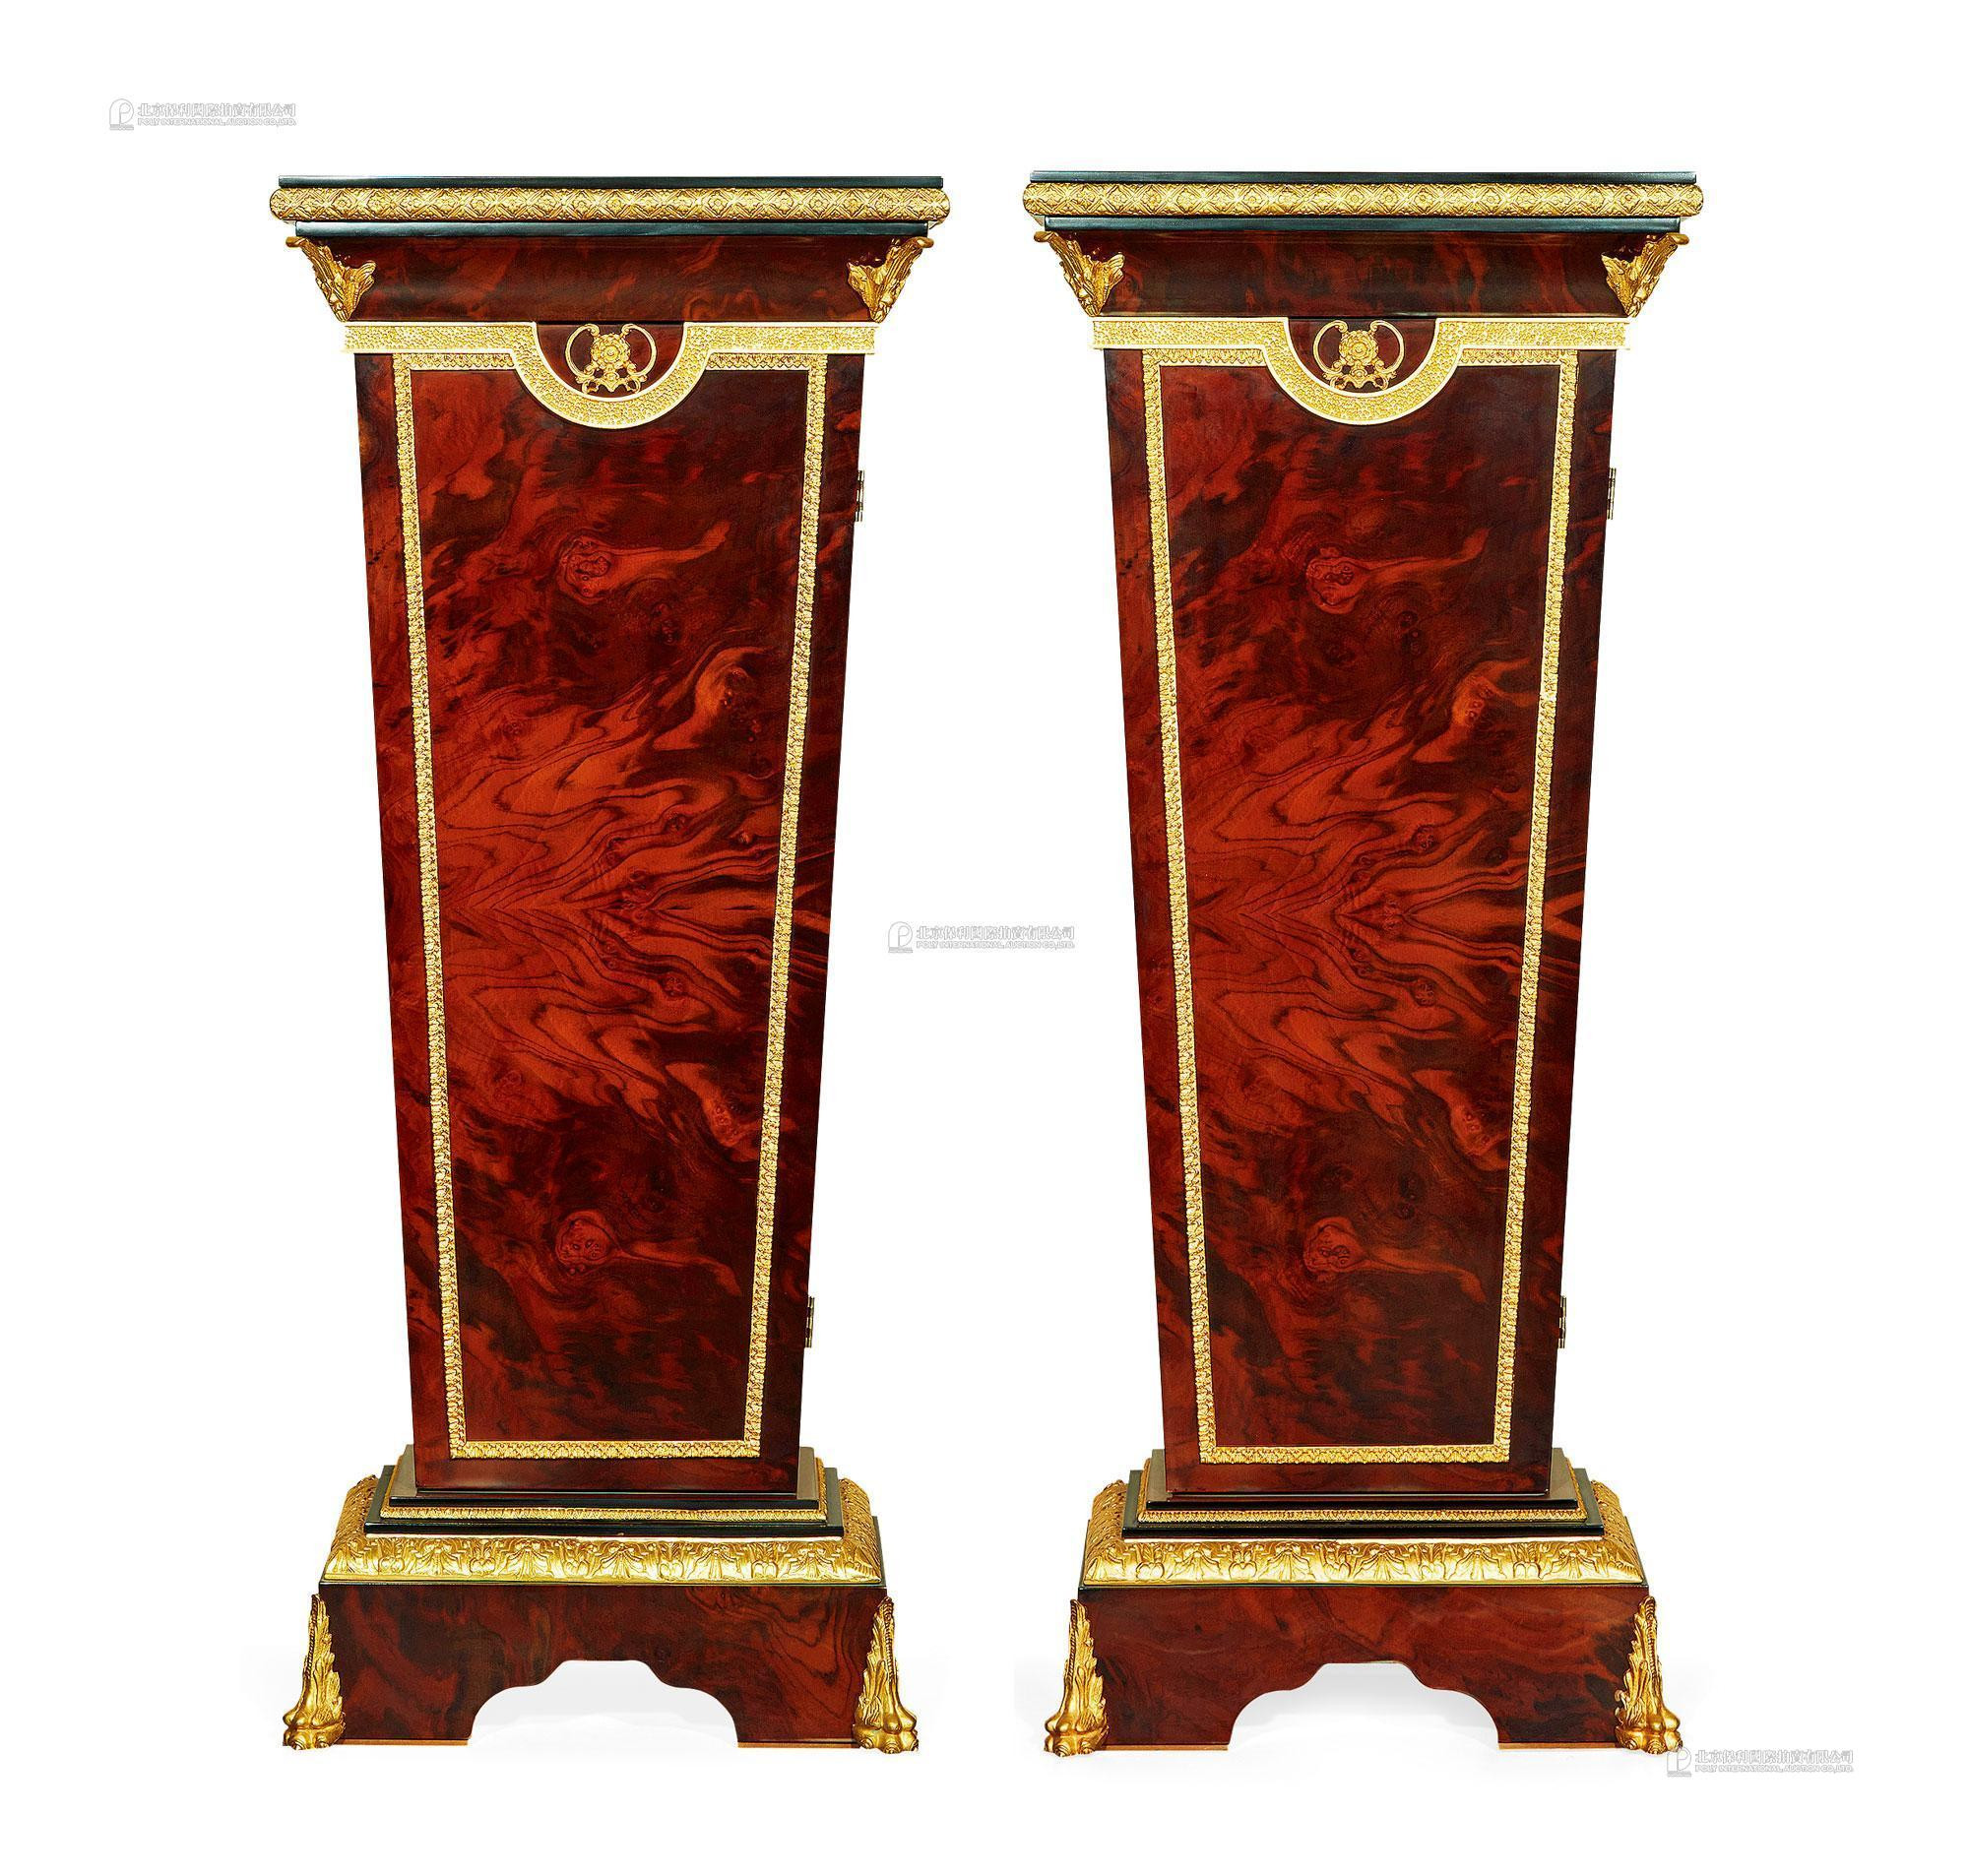 A PAIR OF FRENCH LOUIS XVI STYLE GILT BRONZE SCULPTURE BASE